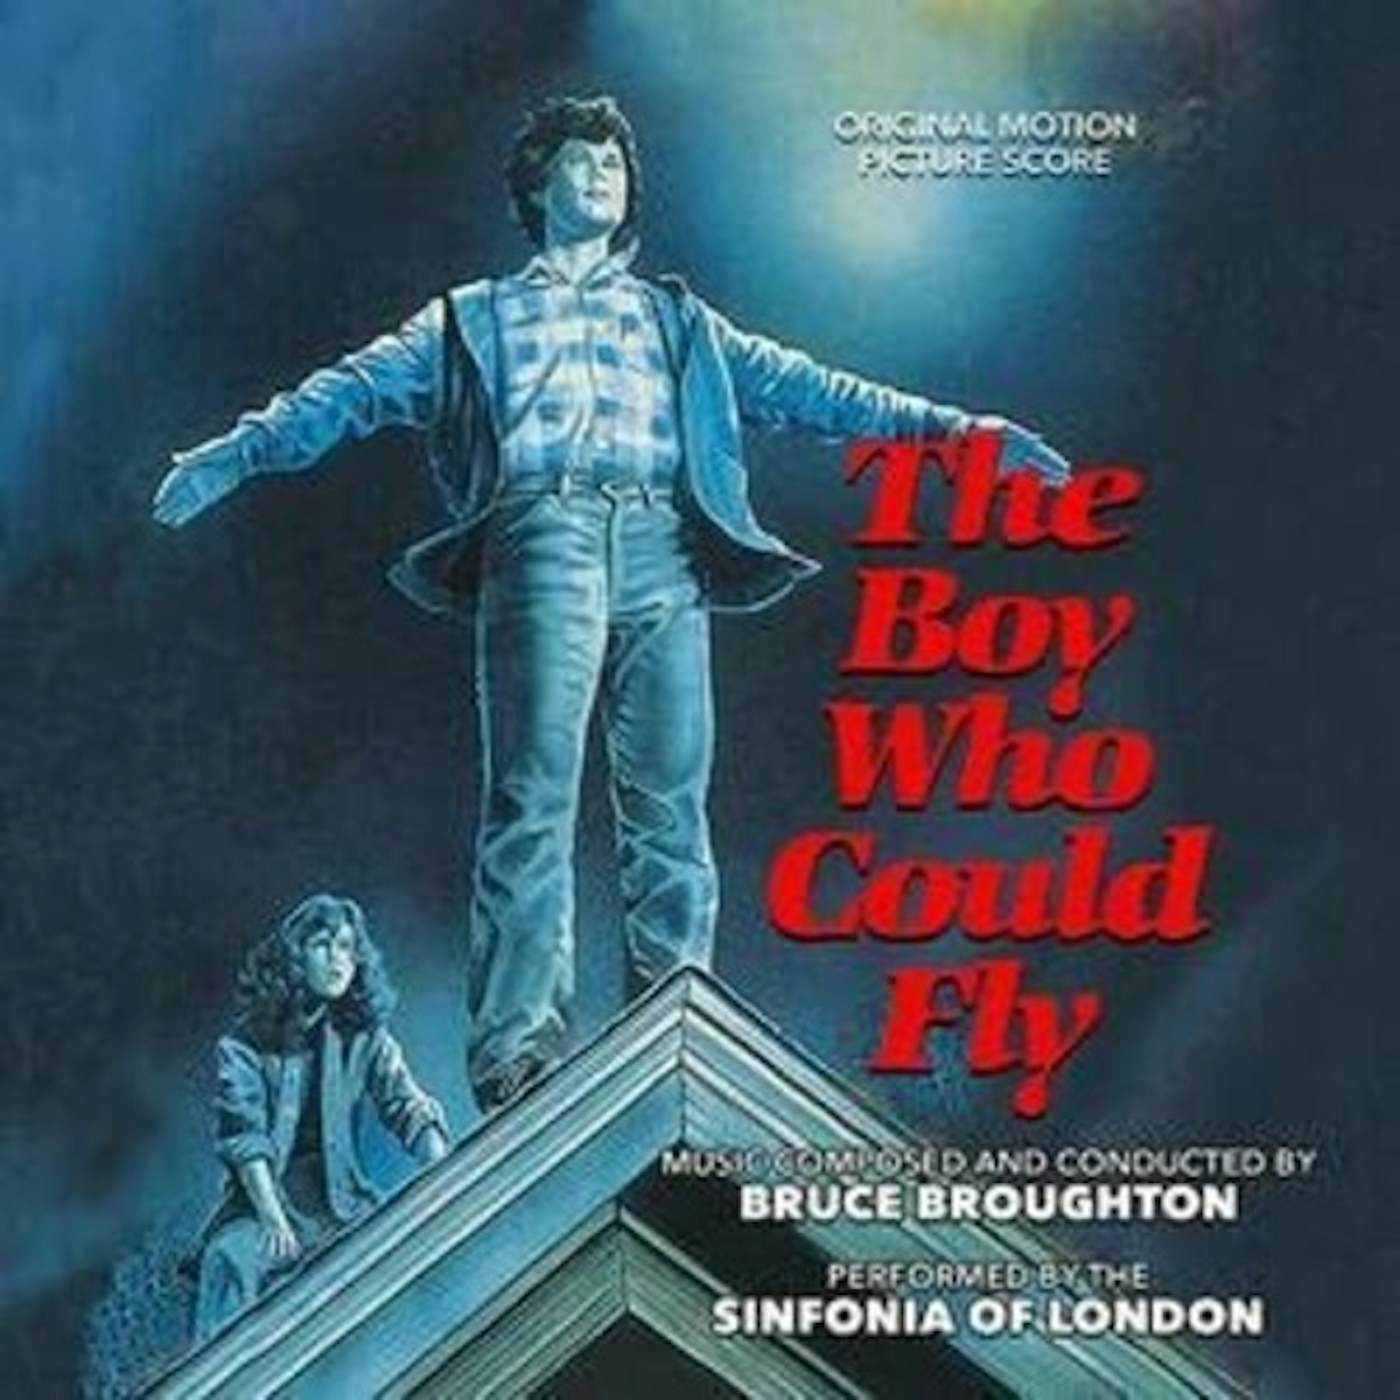 Bruce Broughton BOY WHO COULD FLY / Original Soundtrack CD